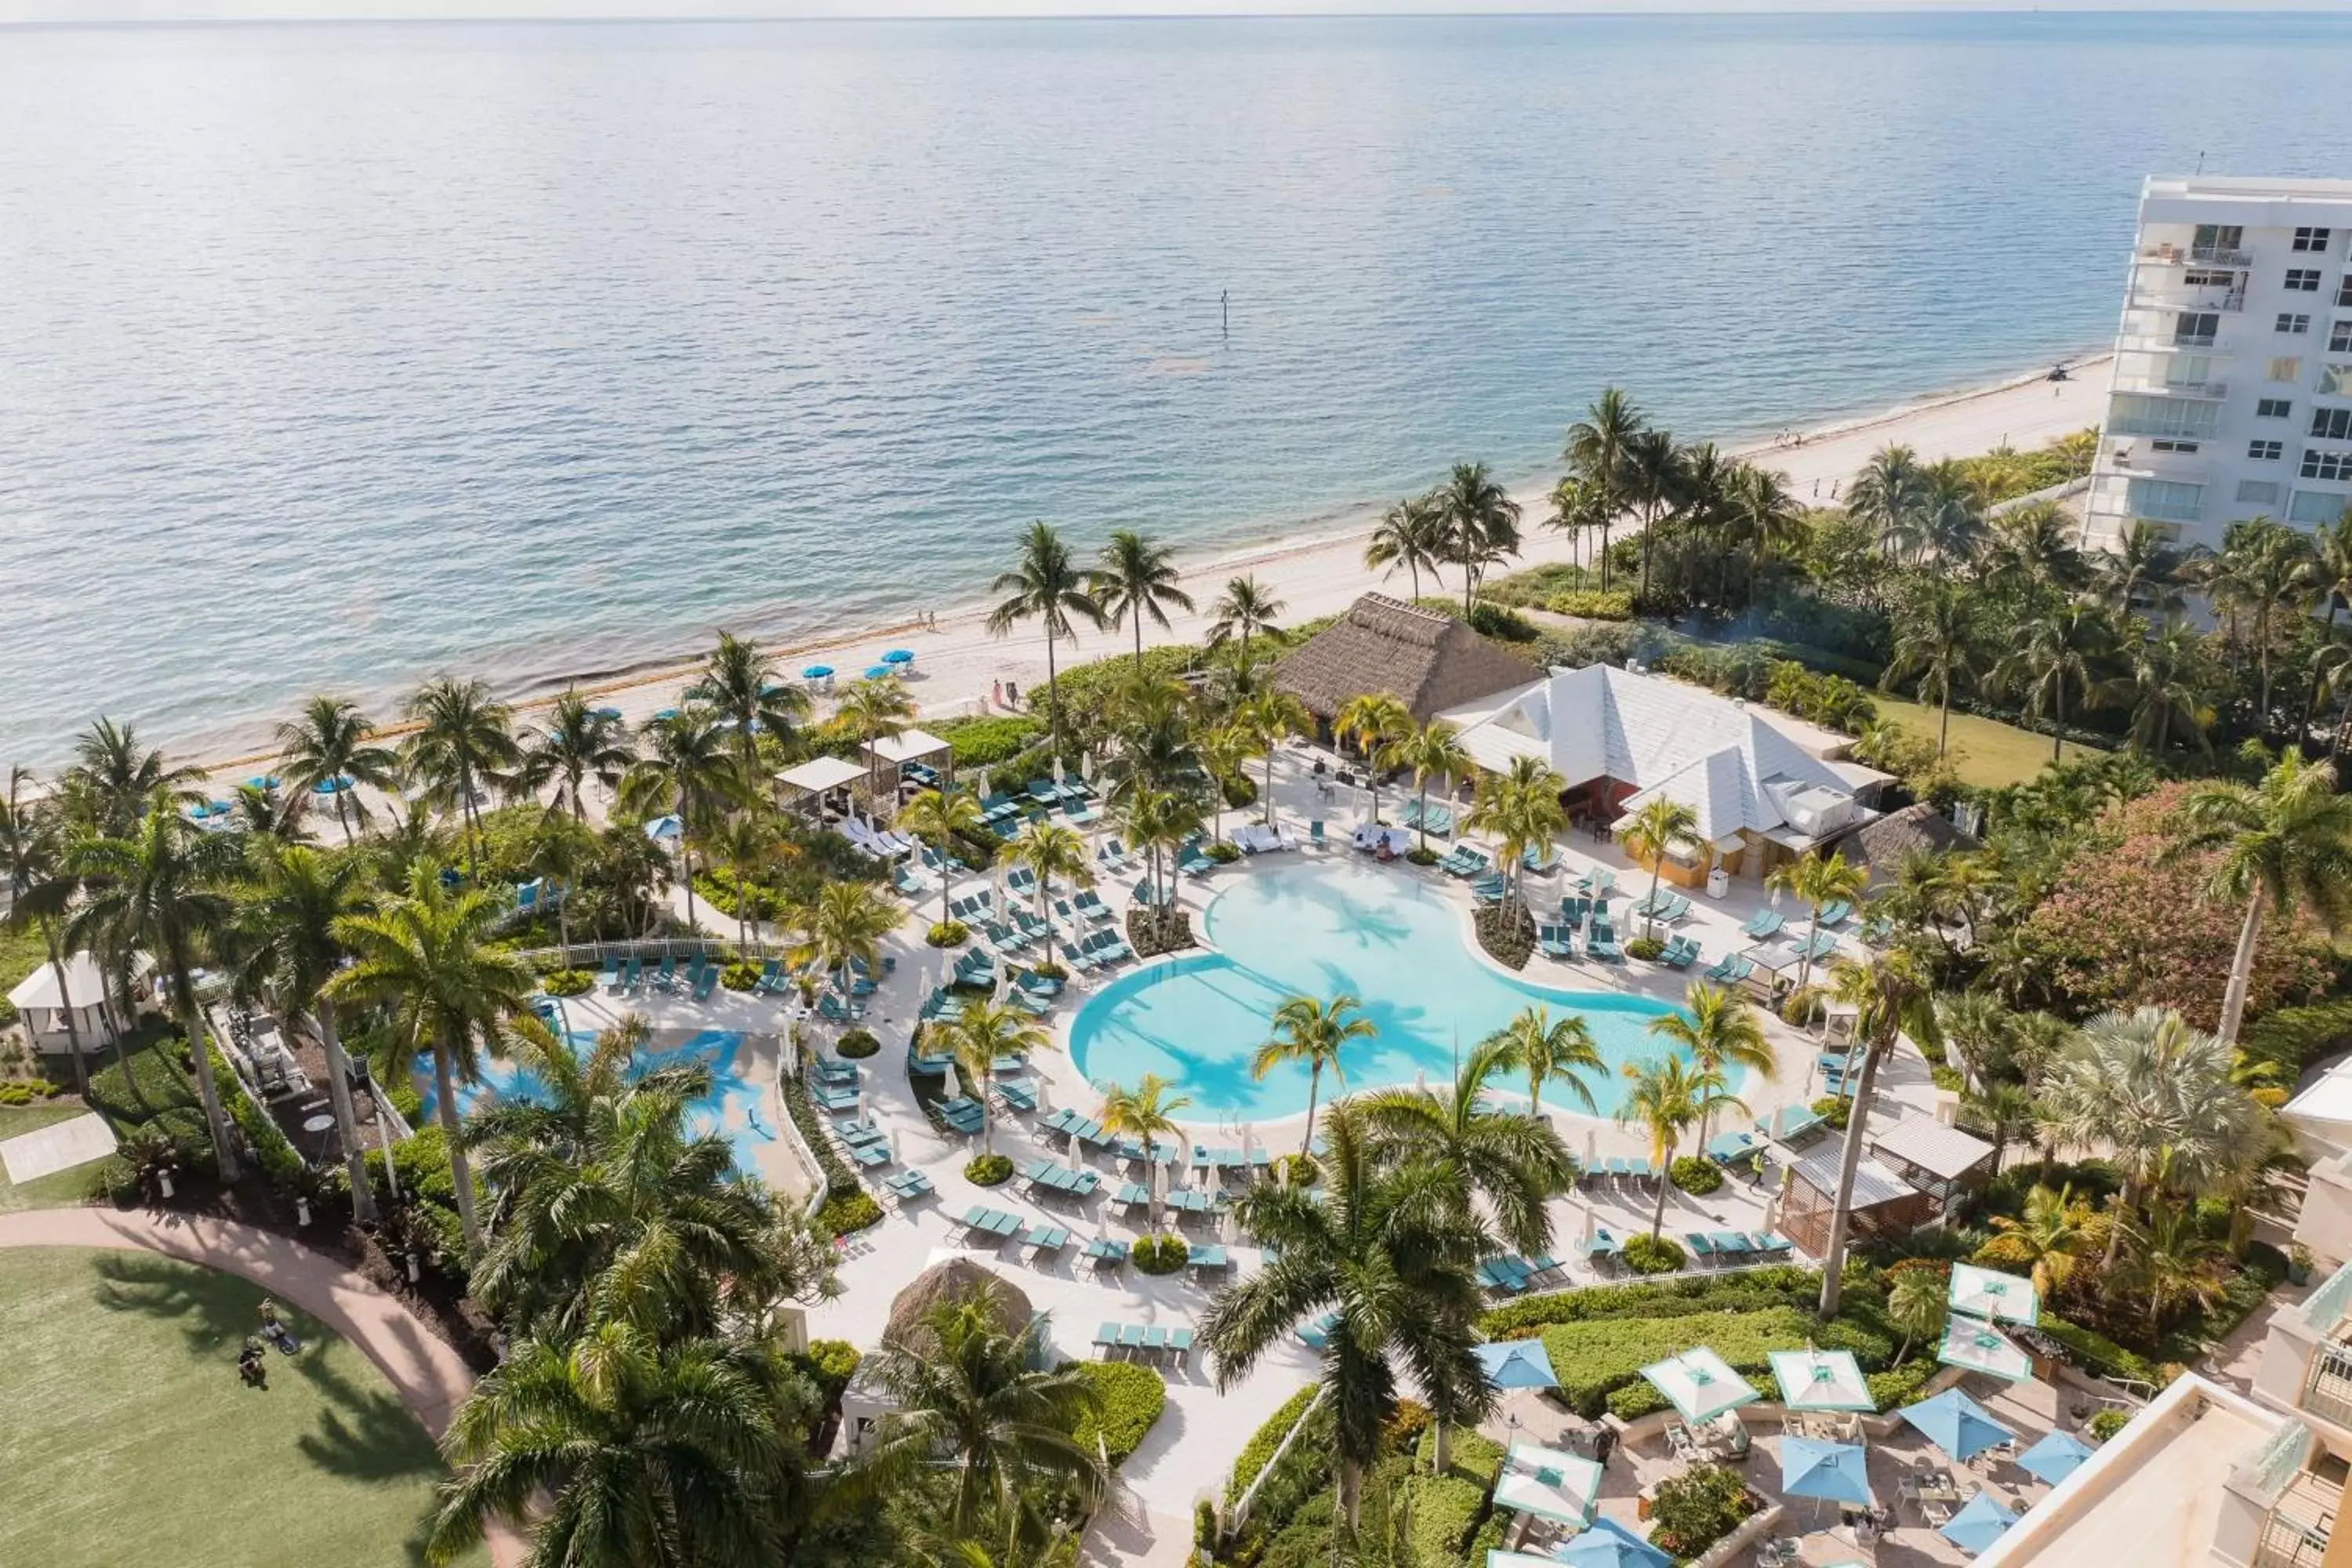 Area and facilities, Bird's-eye View in The Ritz Carlton Key Biscayne, Miami